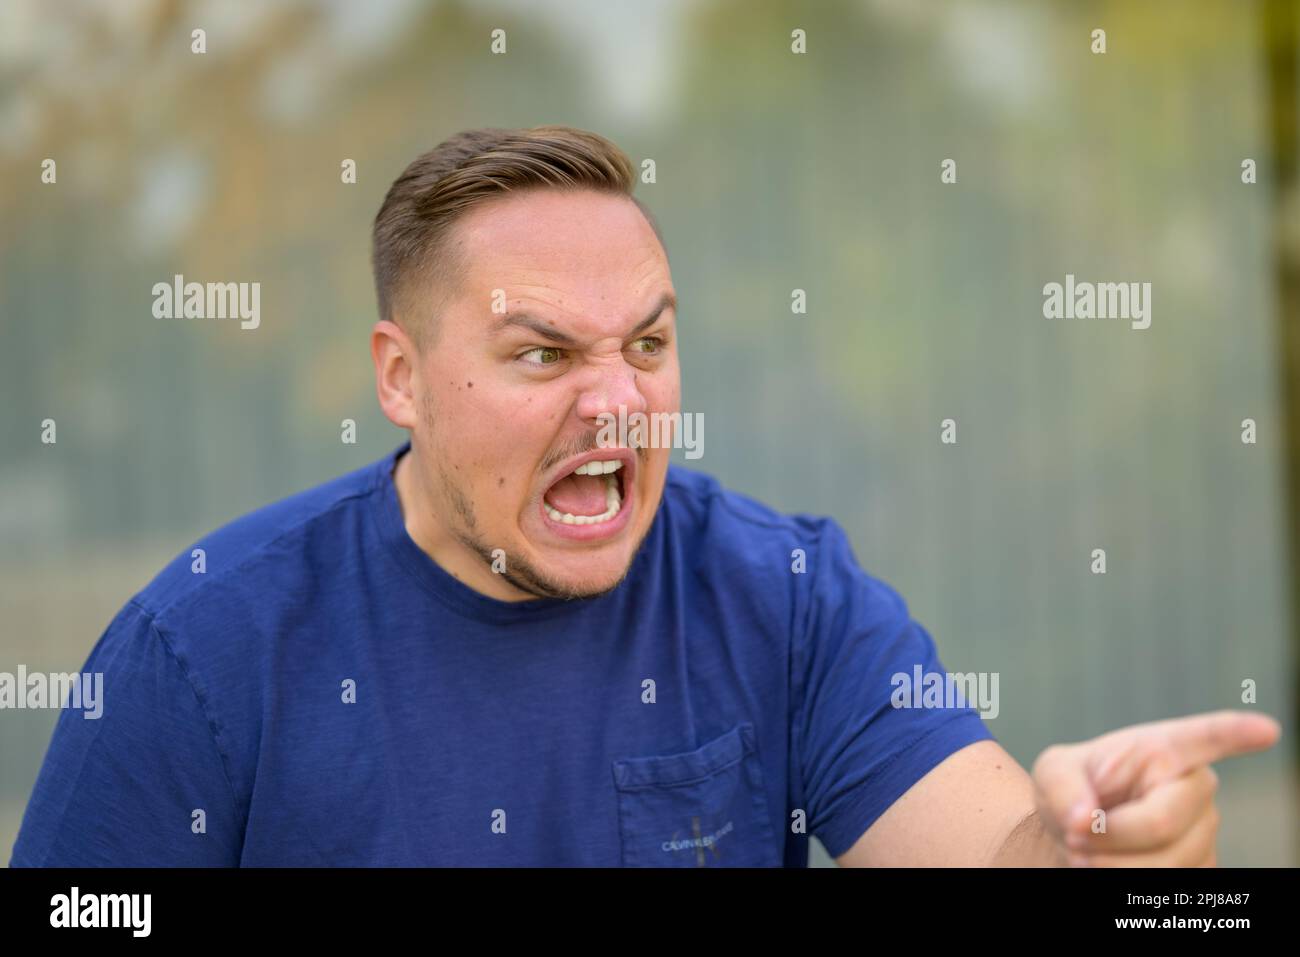 Extremely angry aggressive young man yelling and pointing at someone Stock Photo